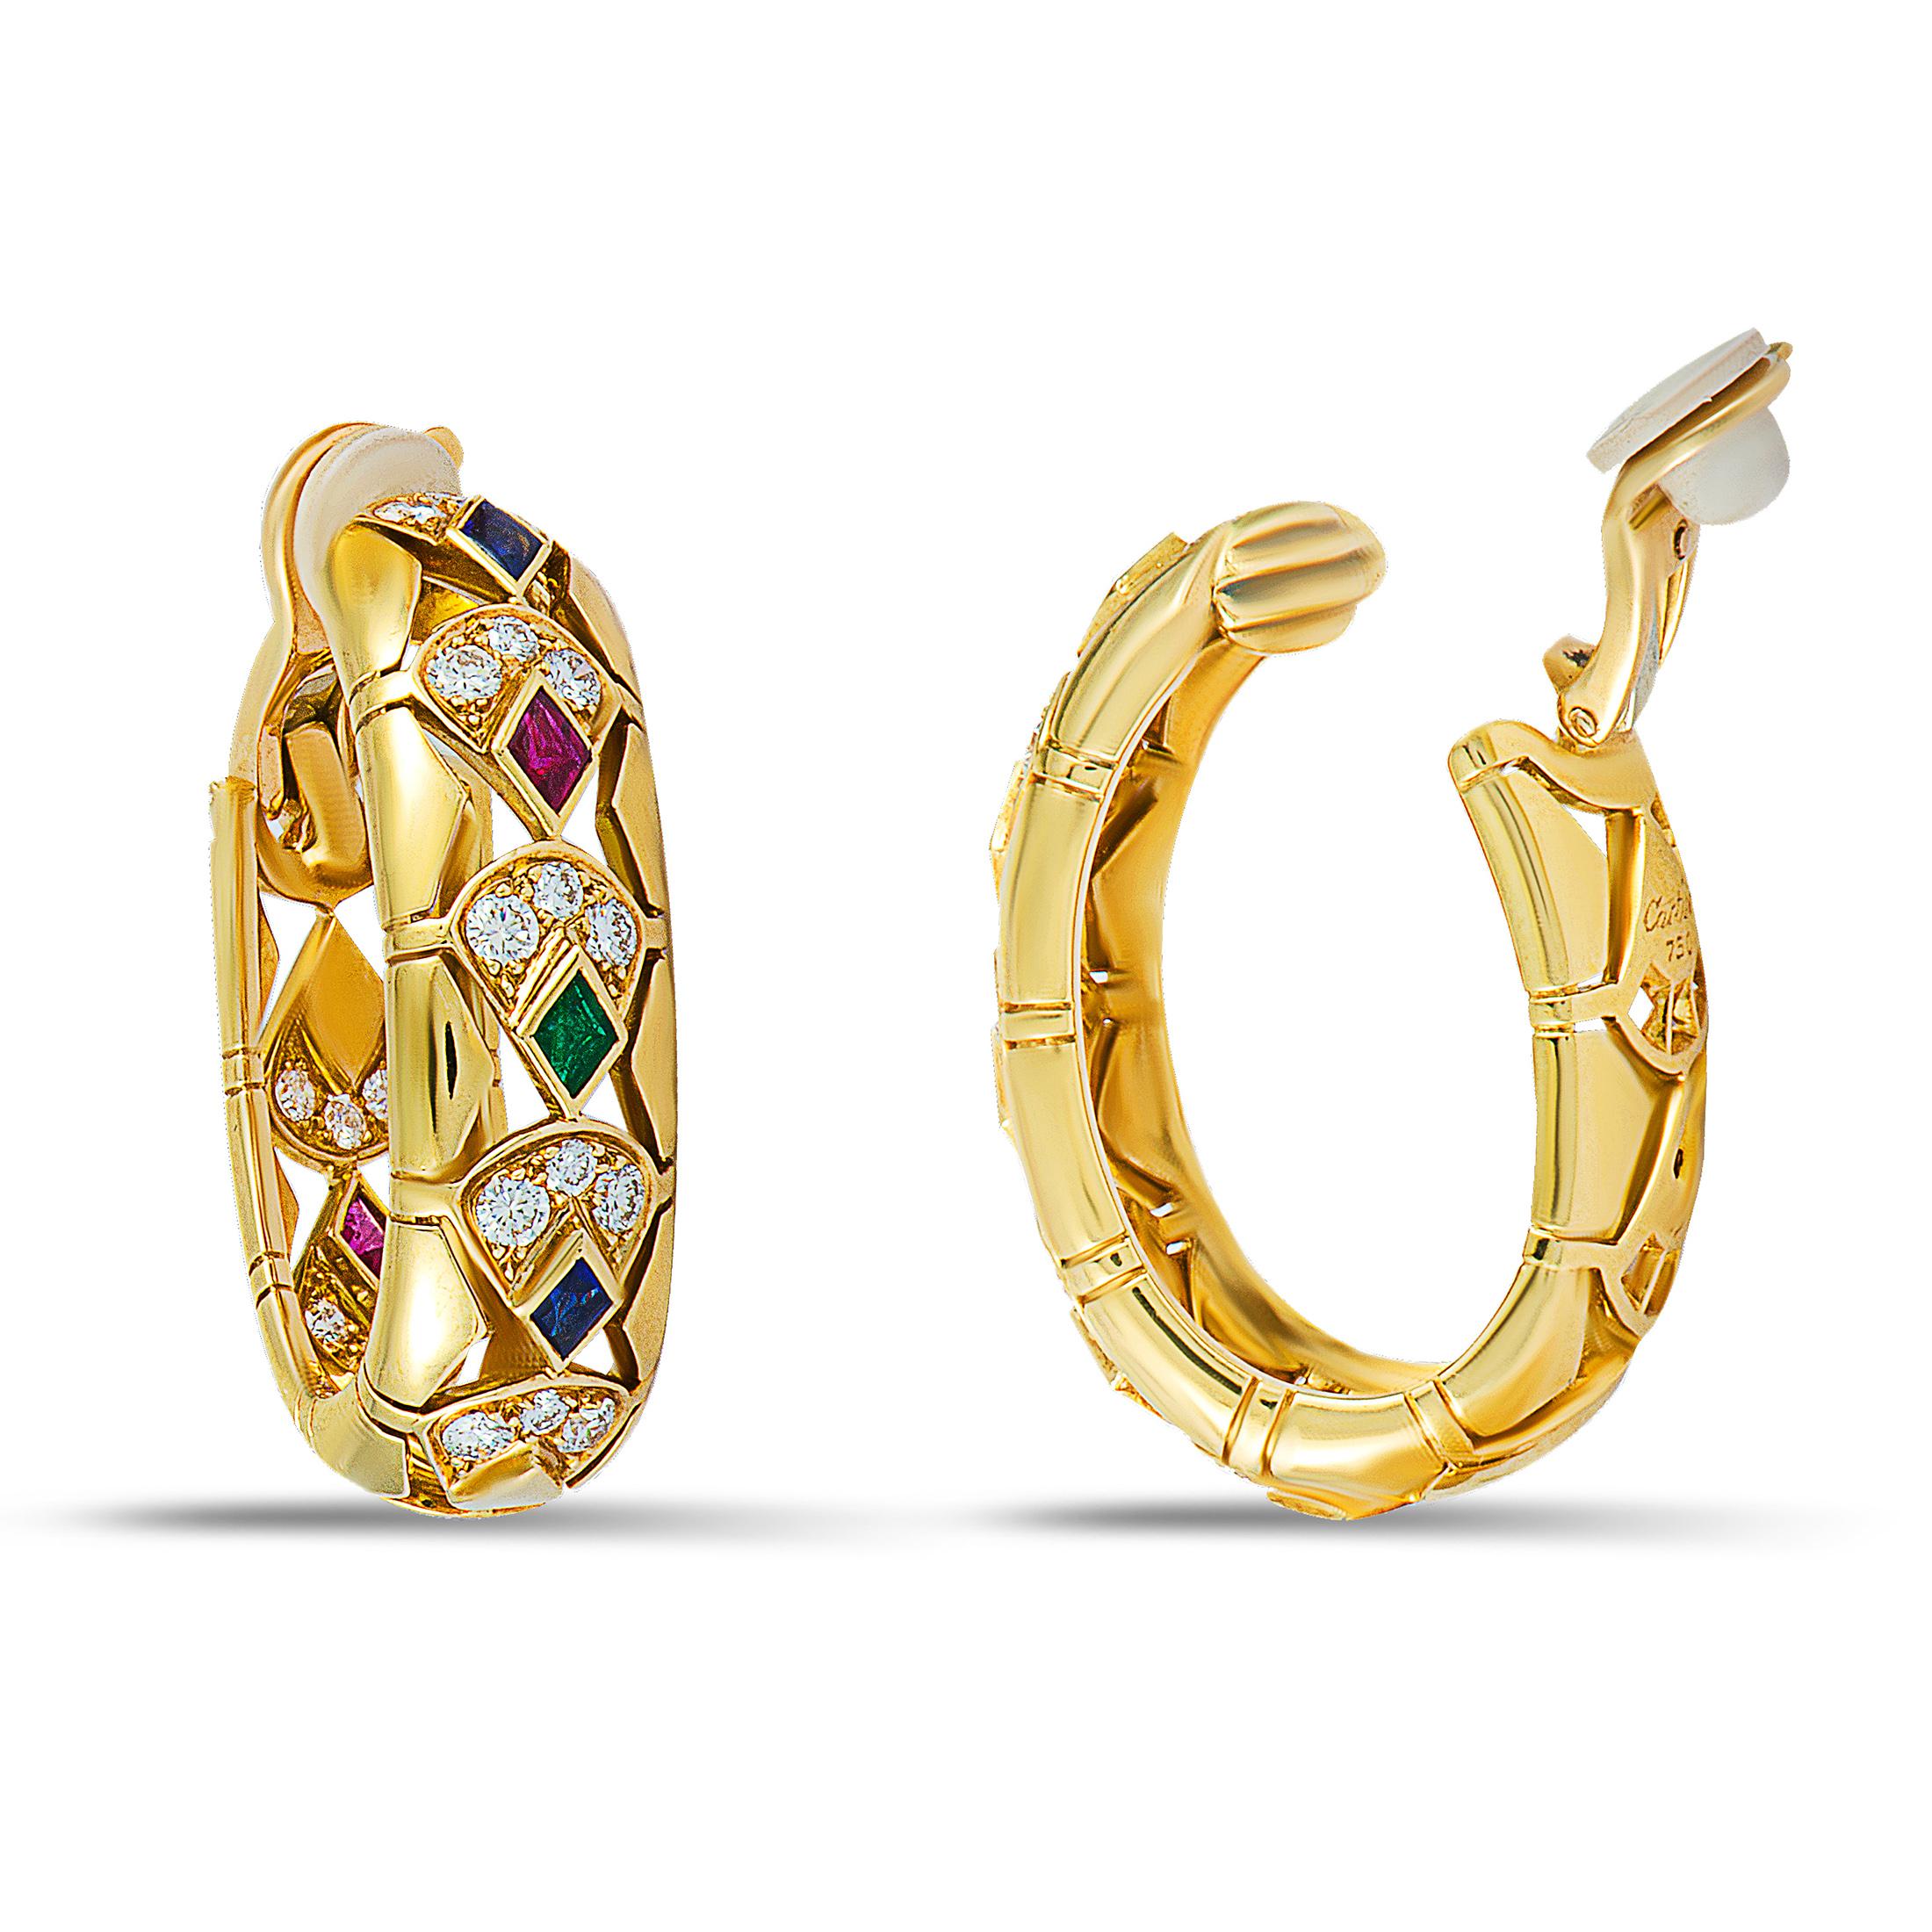 Beautifully designed in a stunningly intricate fashion and wonderfully embellished with a plethora of expertly cut, eye-catching gems, these extraordinary Cartier earrings will accentuate your ensembles in an incredibly attractive manner. The pair